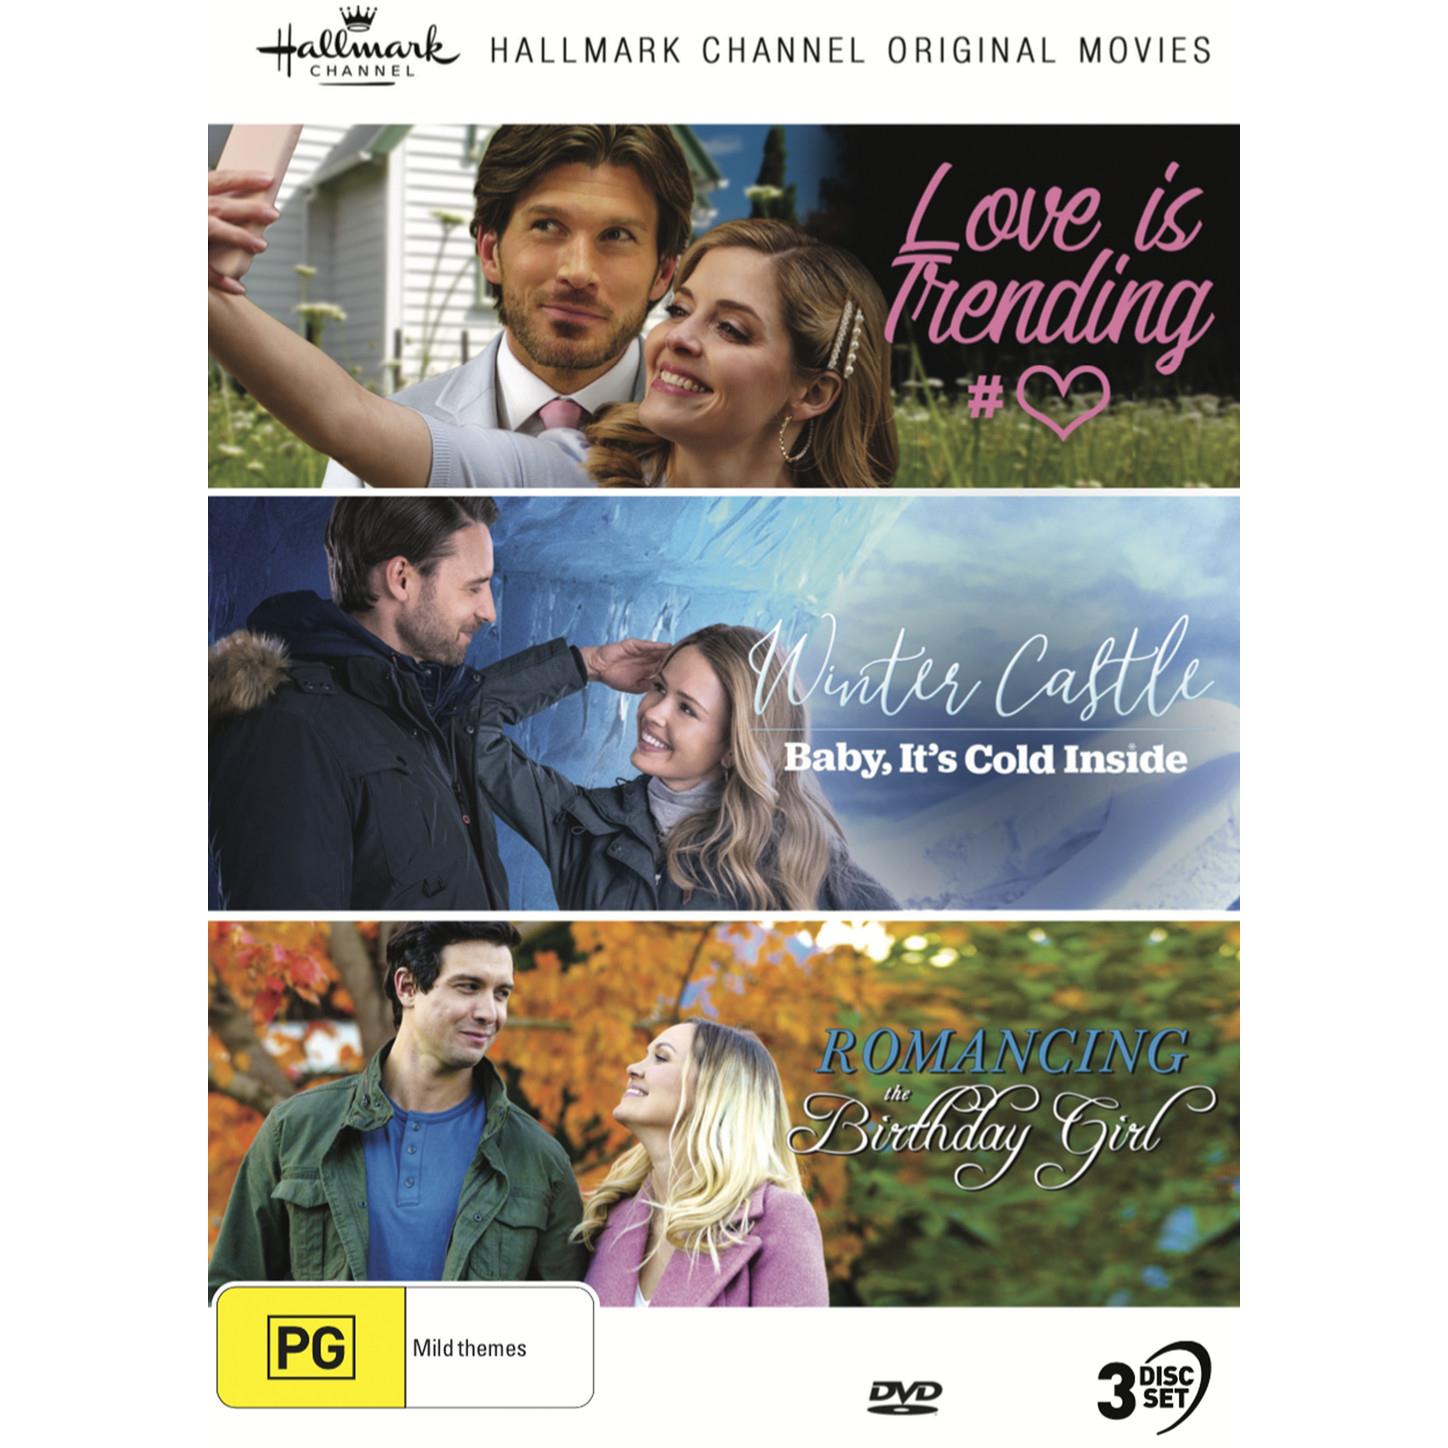 hallmark collection 17 (love is trending/winter castle: baby it's cold inside/romancing the birthday girl)